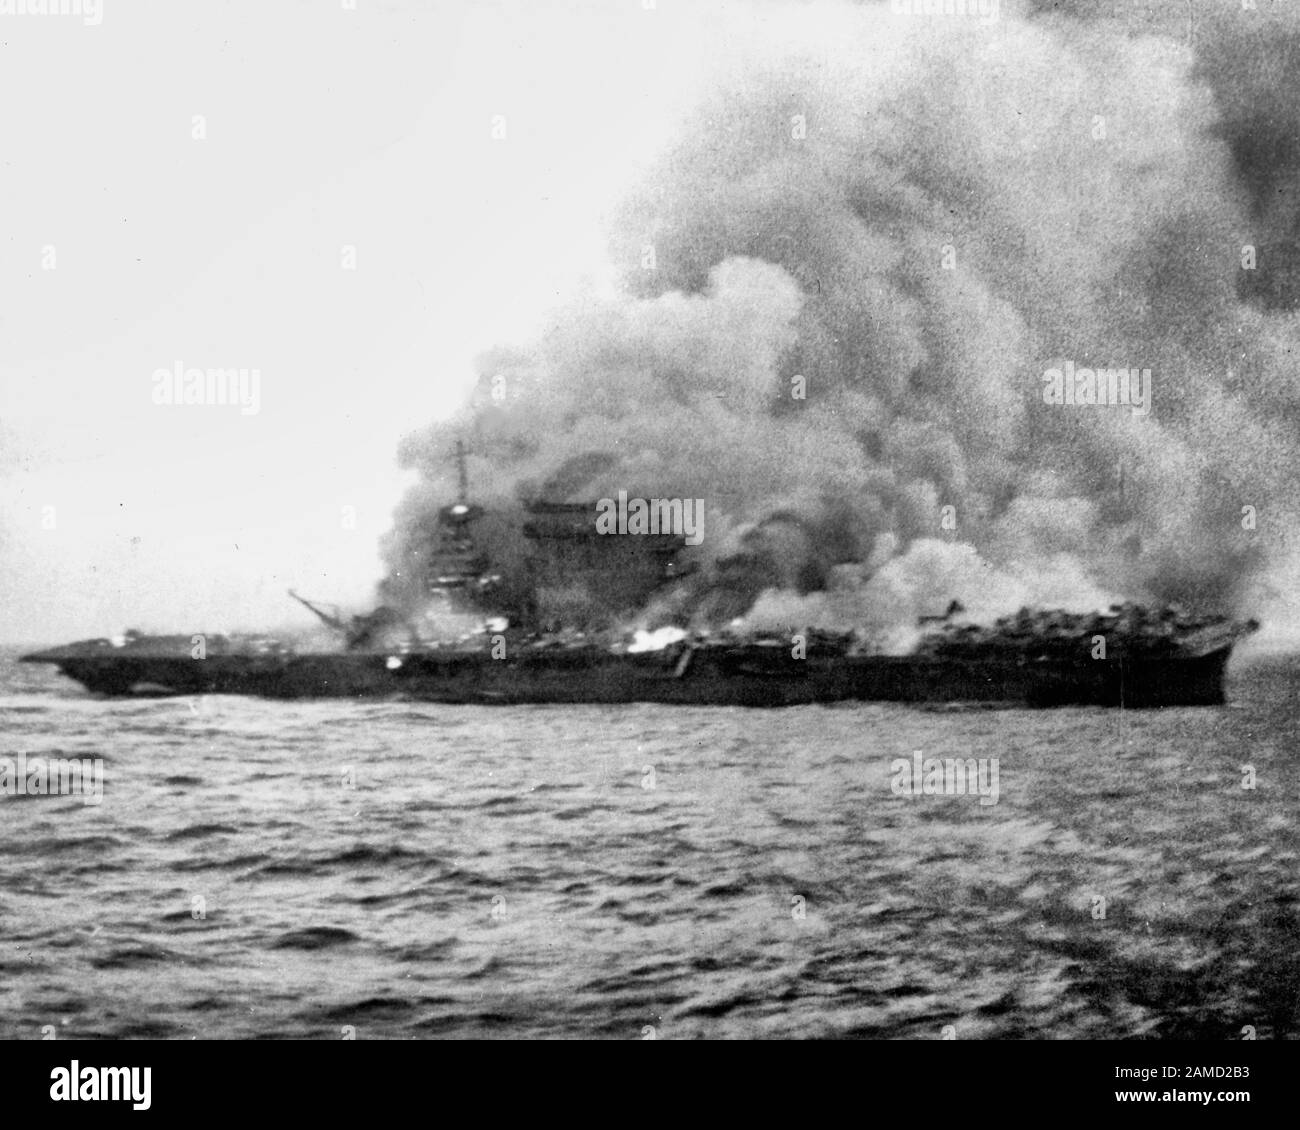 The U.S. Navy aircraft carrier USS Lexington (CV-2), burning and sinking after her crew abandoned ship during the Battle of the Coral Sea, 8 May 1942. Note the planes parked aft, where the fires have not yet reached. Stock Photo